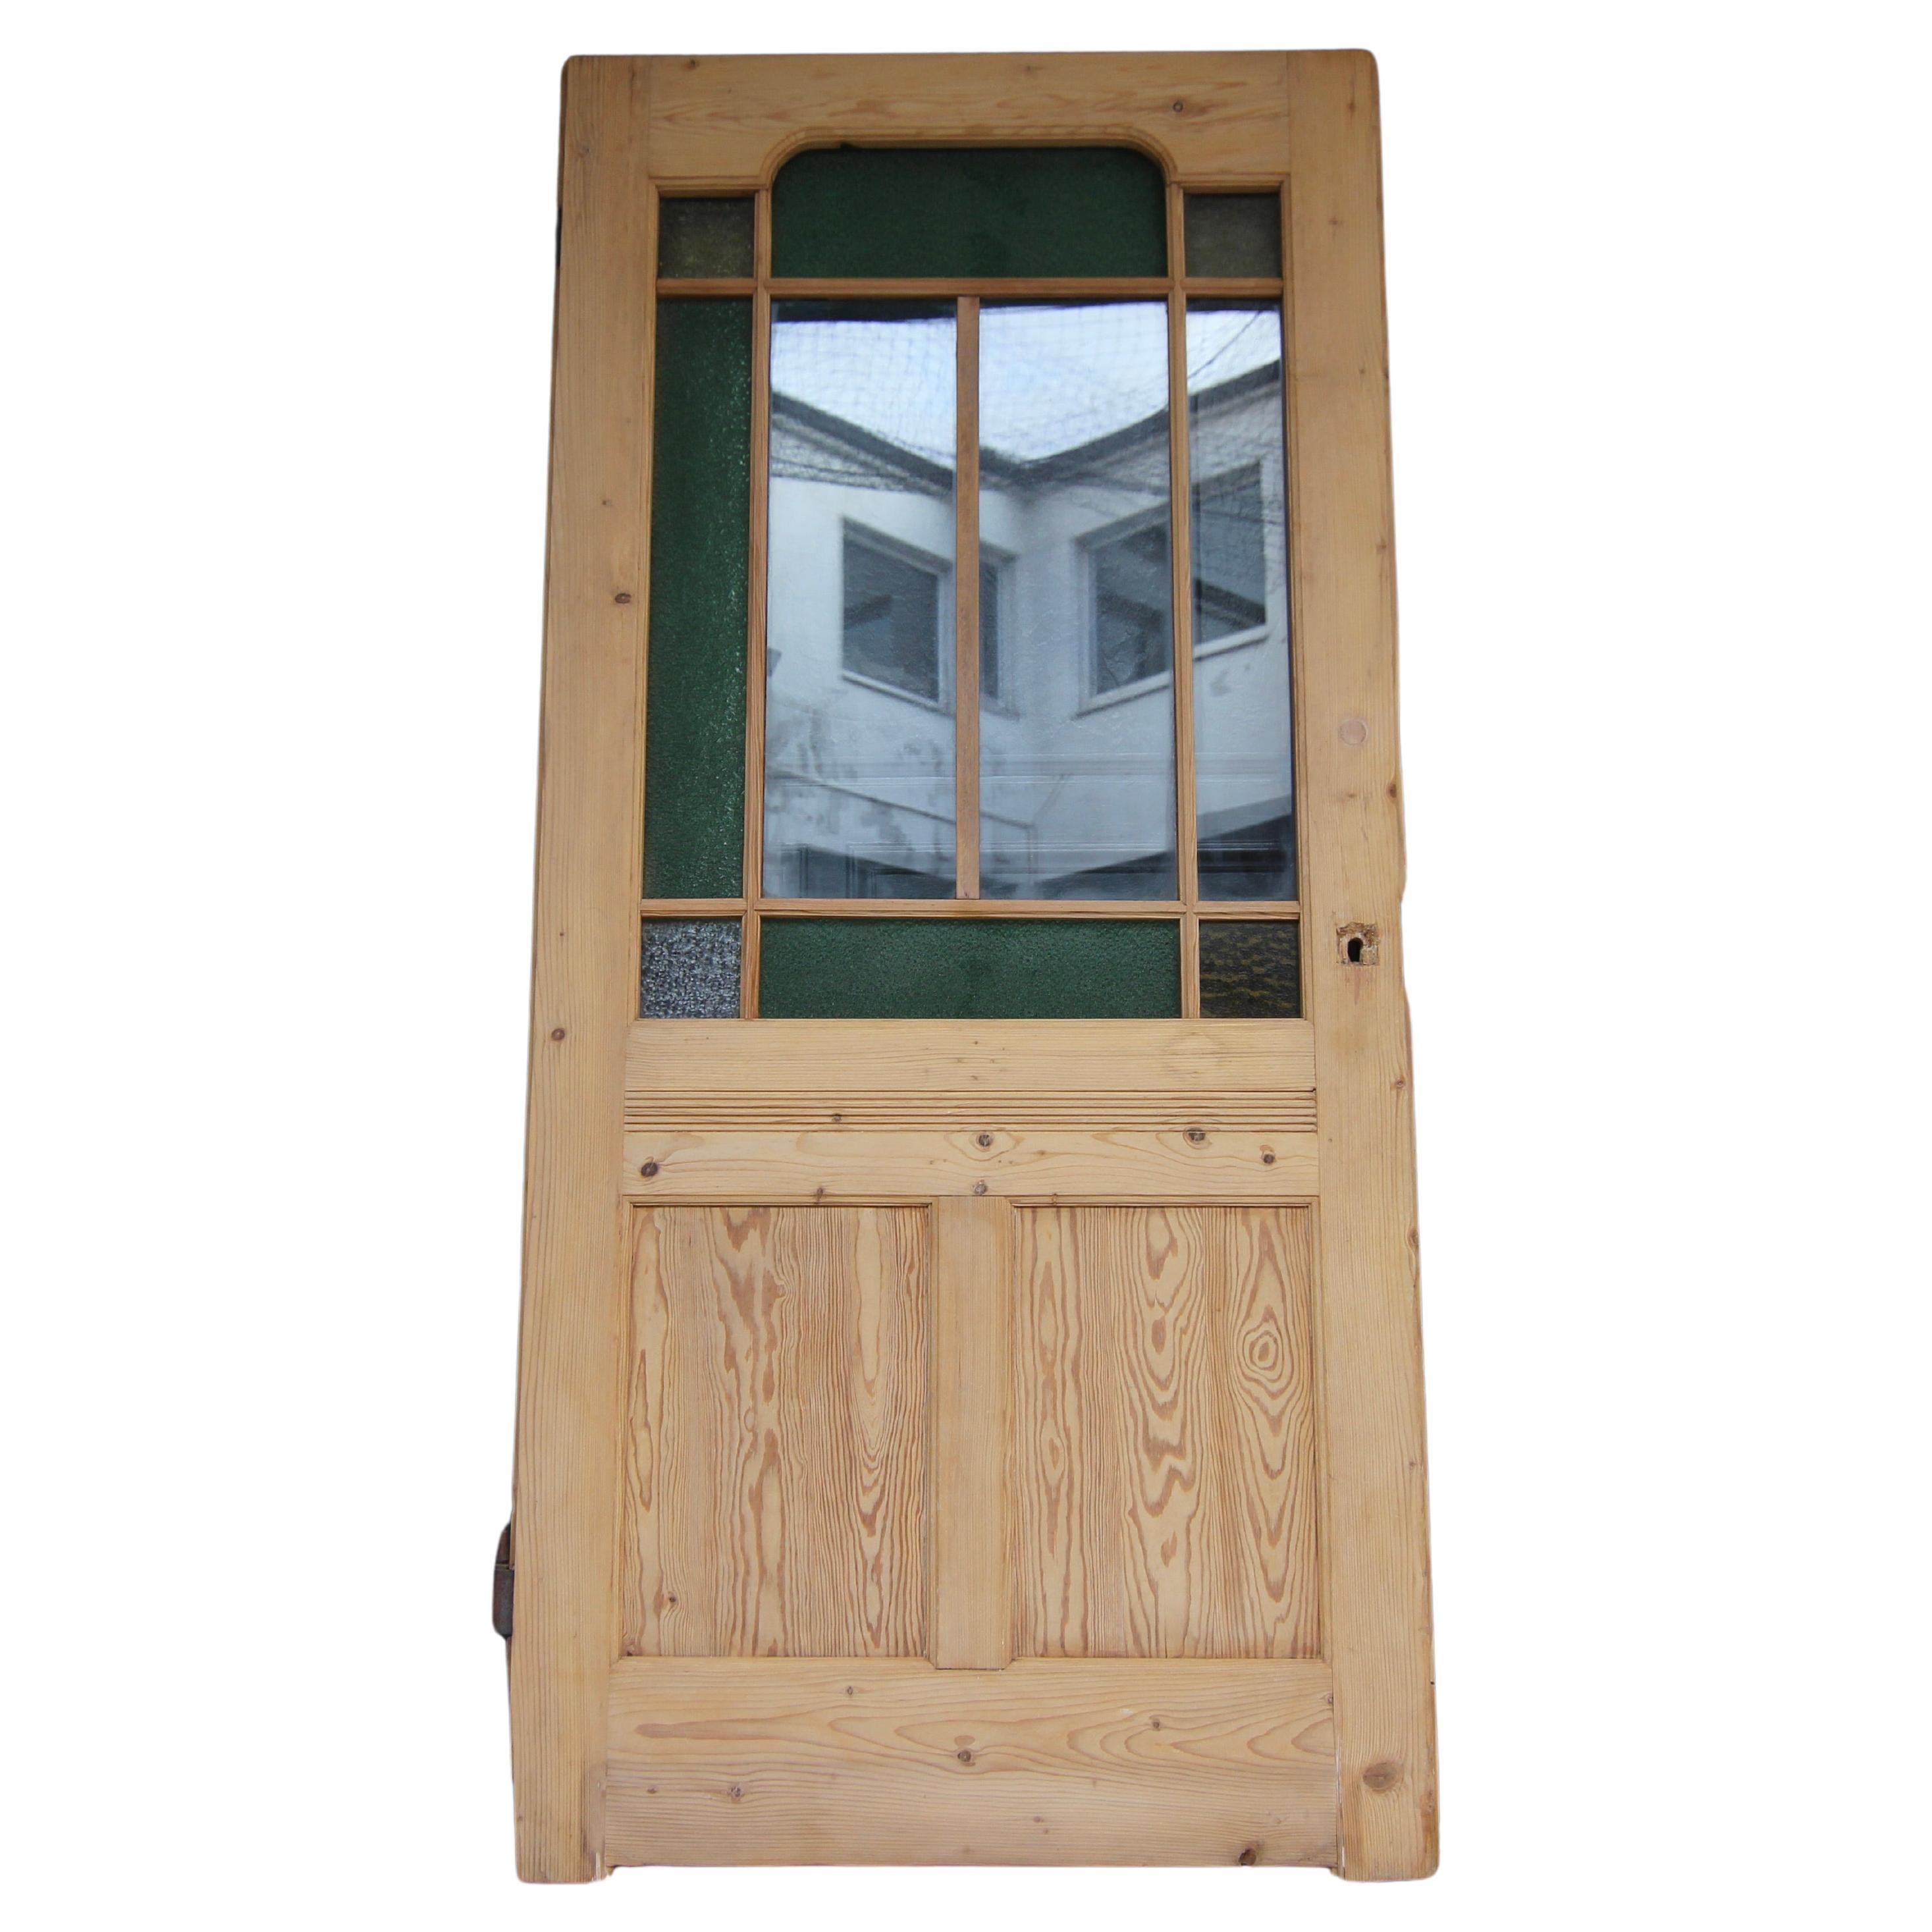 Early 20th Century Jugendstil Door made of Pine with Glass